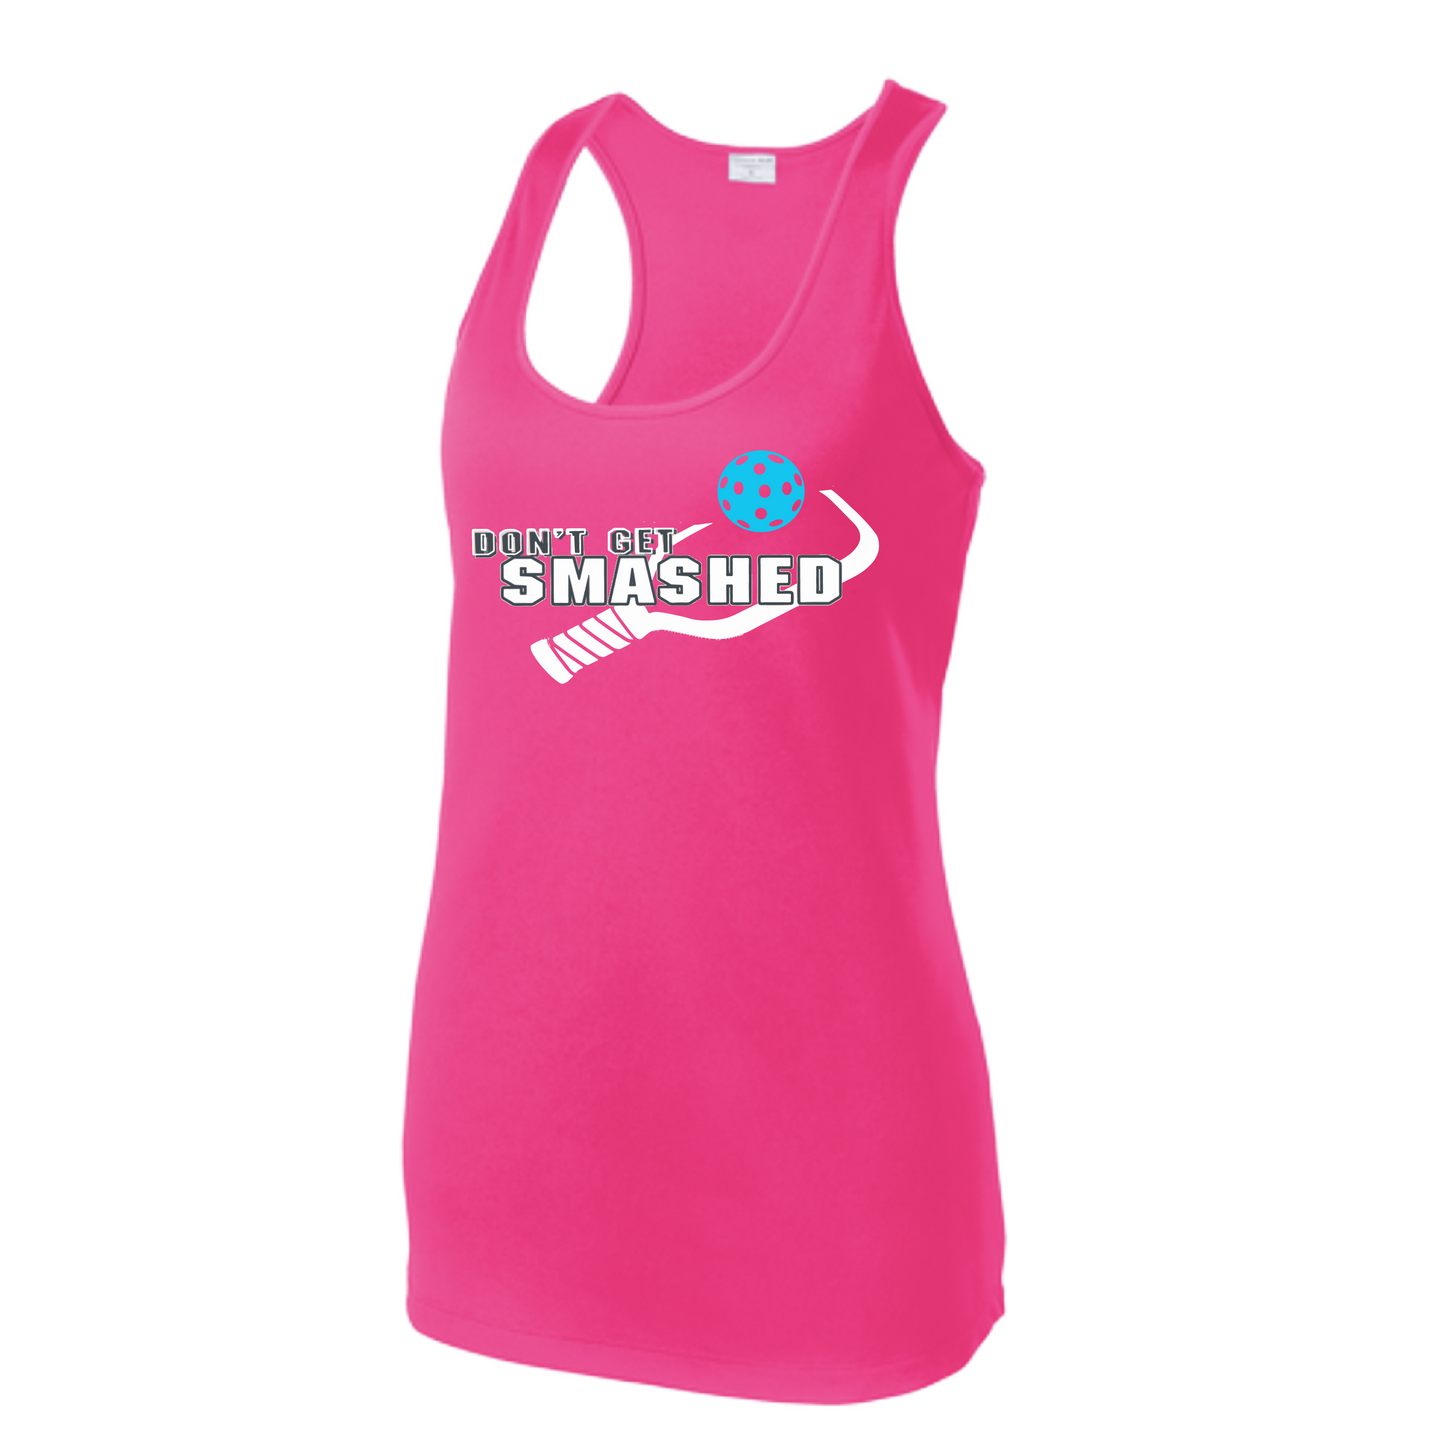   Create a bold statement in this ultra-soft Women's Pickleball Racerback Shirt! Featuring a sassy blend of colors - cyan, orange, and pink - this moisture wicking fabric and PosiCharge technology keep colors vibrant. Highly breathable and lightweight, it won't weigh you down but sure will turn heads!